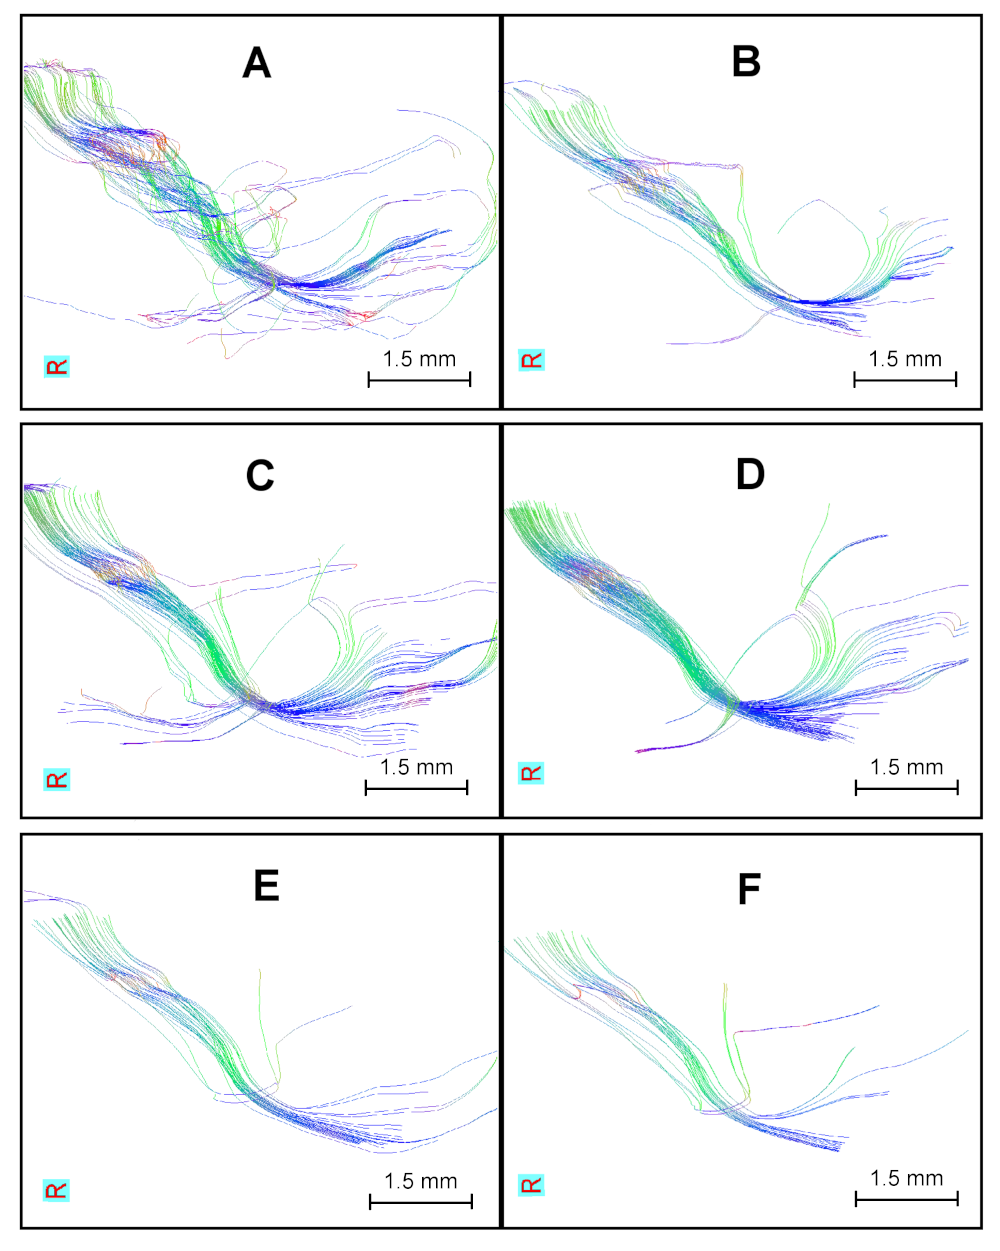 Sagittal views of the Corticospinal tract (CST) in different spatial resolutions. From top to bottom: tested resolutions (0.2mm^3, 0.3mm^3 and 0.4mm^3). Left column (A-E): CST in MoD. Right column (B-F): CST in averaged images. B is obtained from T-Avg_6 in Figure 9a. Replicating a likely execution framework in longitudinal studies. Pairs C-D and E-F corresponds to MoD bars and \ast \ast in Figure 8b and 8c respectively. 